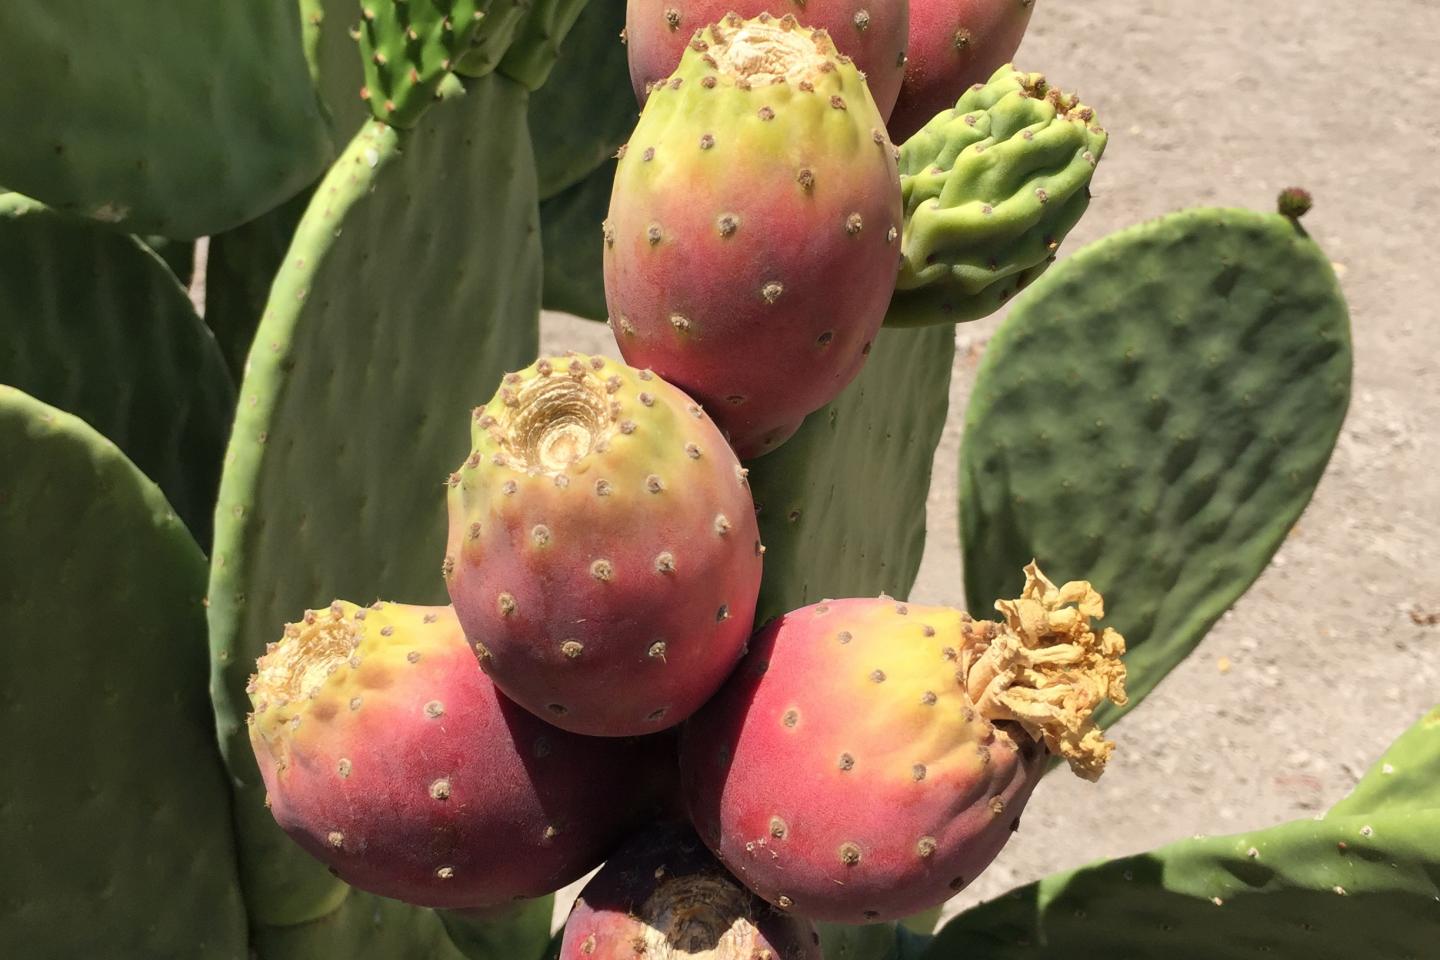 Cactus pear plant studied as drought-tolerant crop for sustainable fuel and food